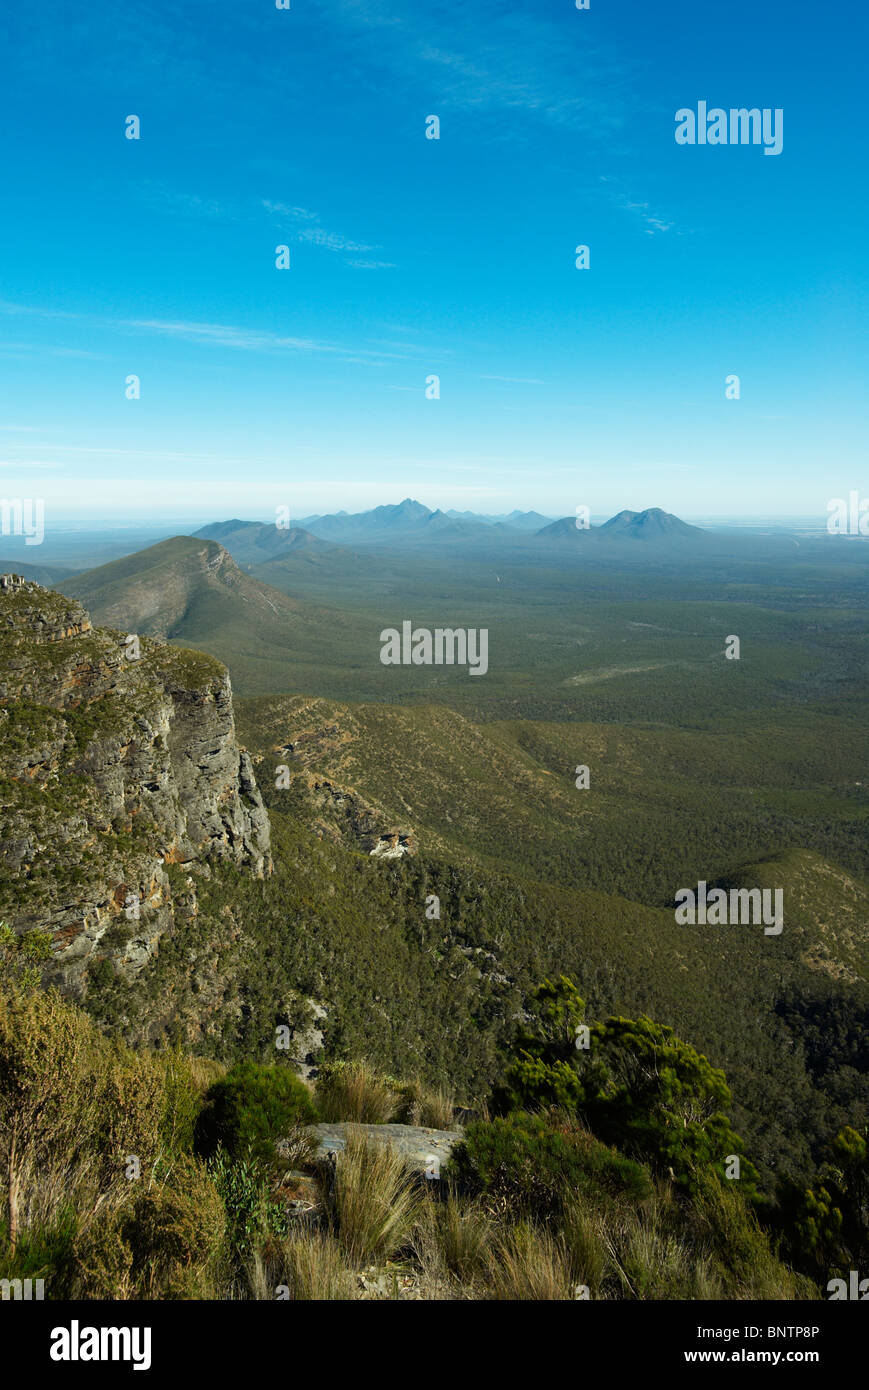 Australia, Western Australia, Stirling Range NP, Toolbrunup & Mt Trio from slopes of Bluff Knoll. Stock Photo